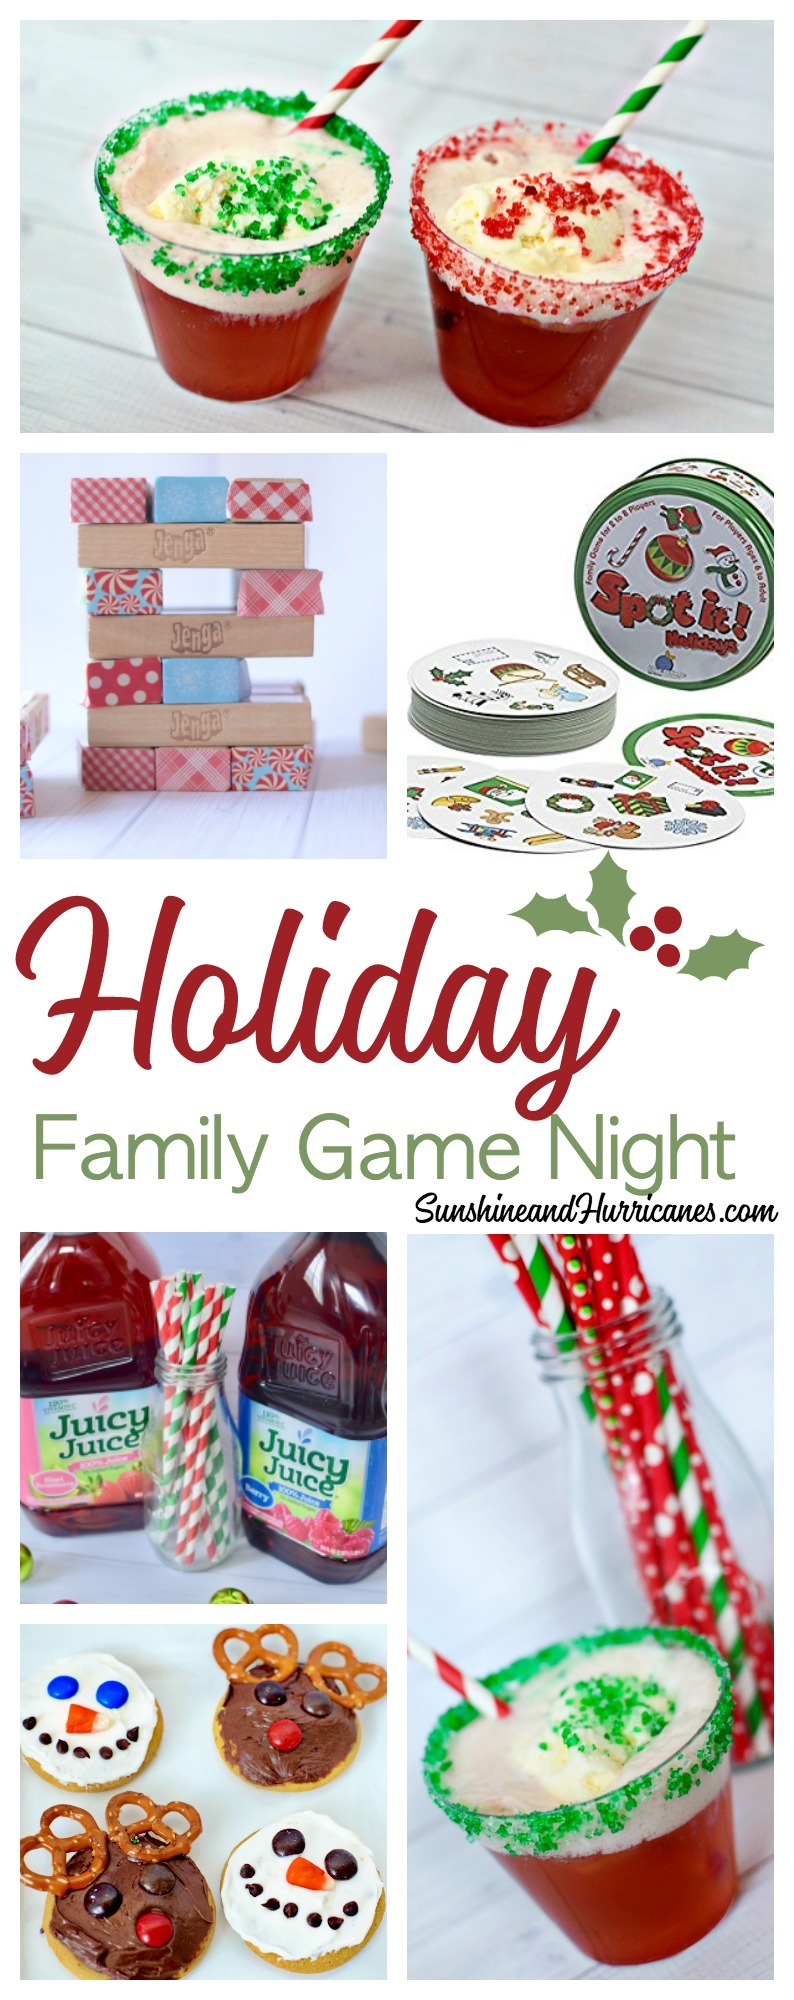 Put on your Christmas PJs, have your holiday playlist ready and grab these great family Christmas games for a holiday family game night! Make memories, not plans. 